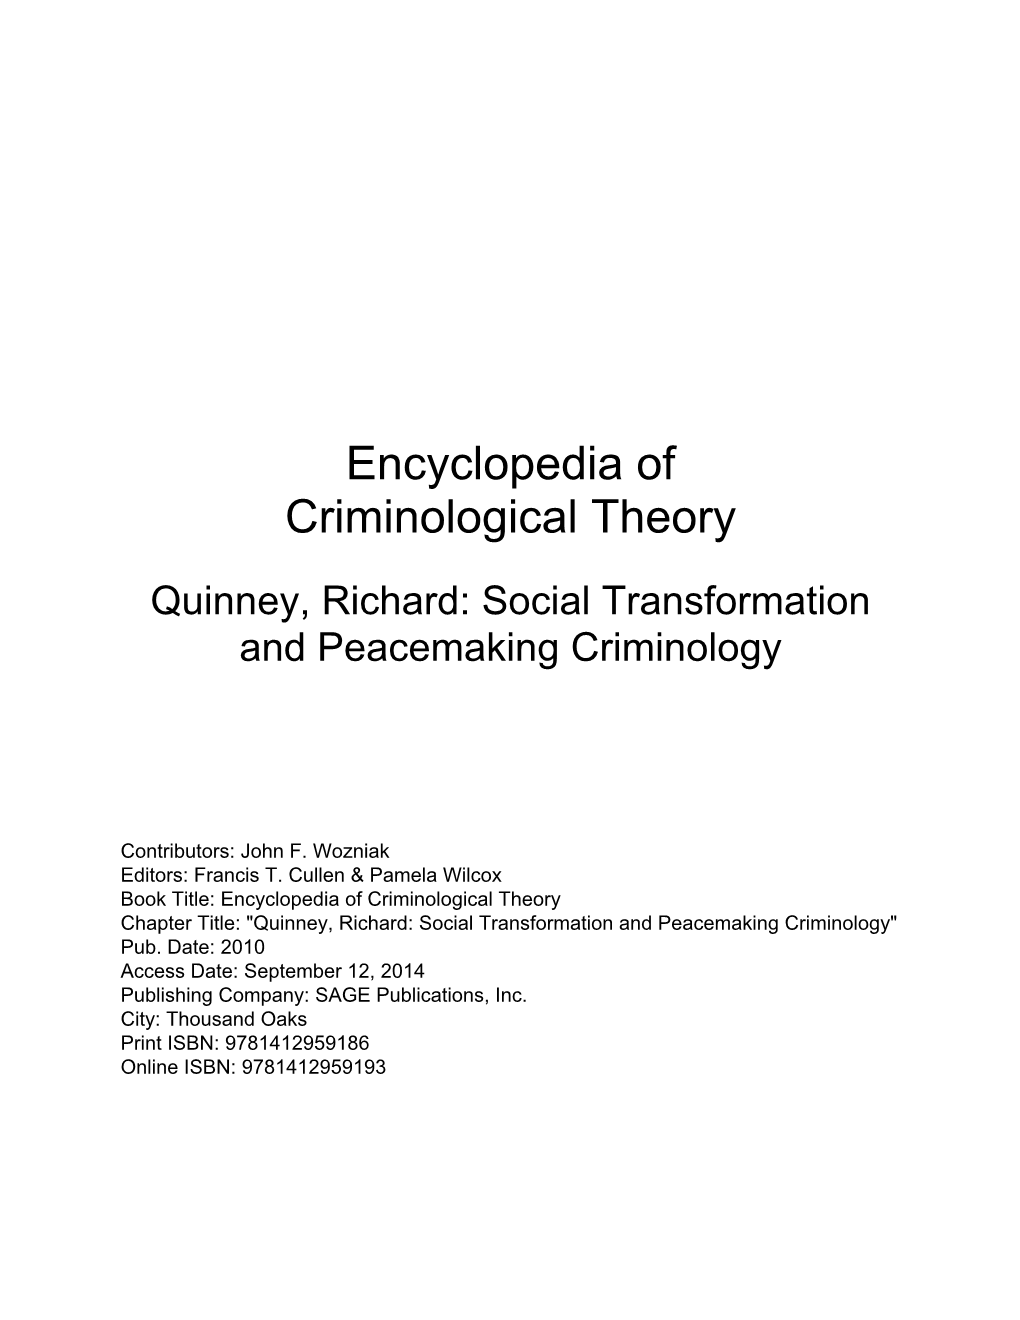 Quinney, Richard: Social Transformation and Peacemaking Criminology